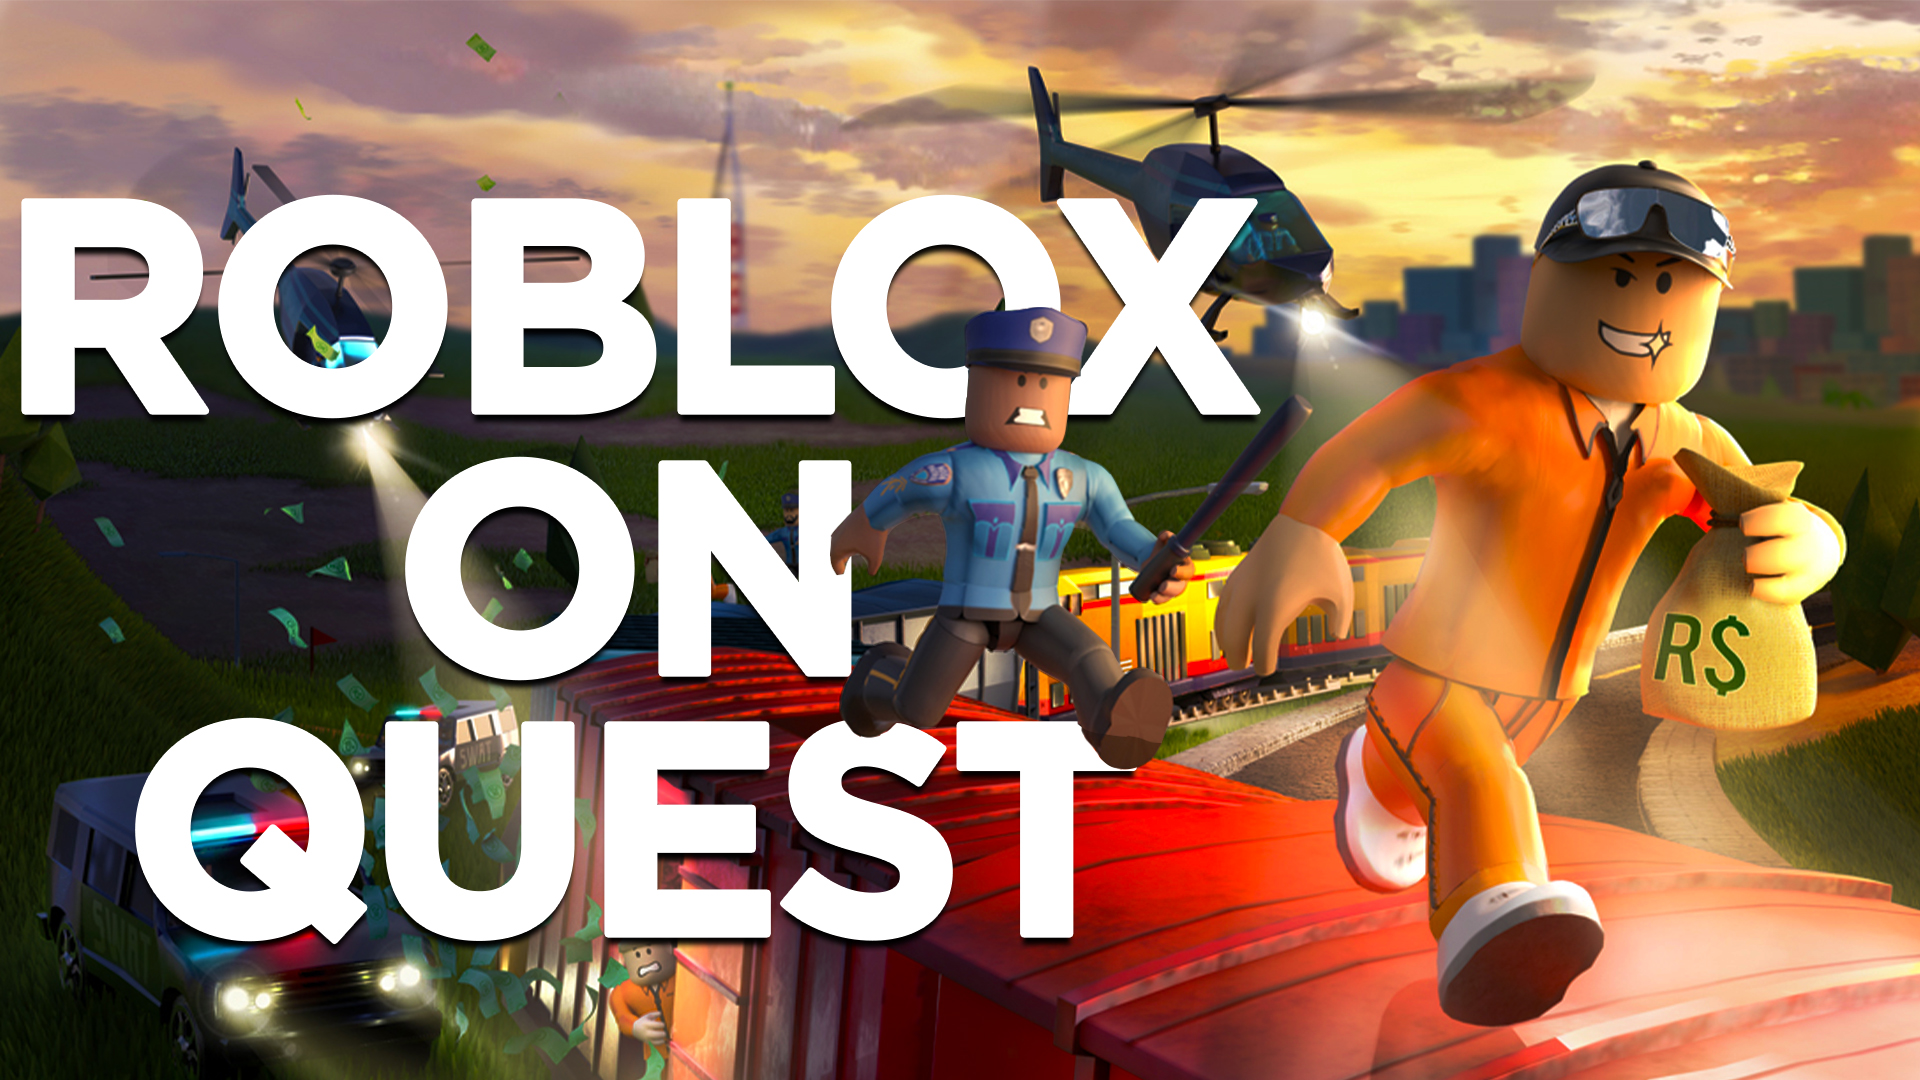 How To Play Roblox In Vr On Oculus Quest 2 Vrscout - how to be a guest in roblox on pc